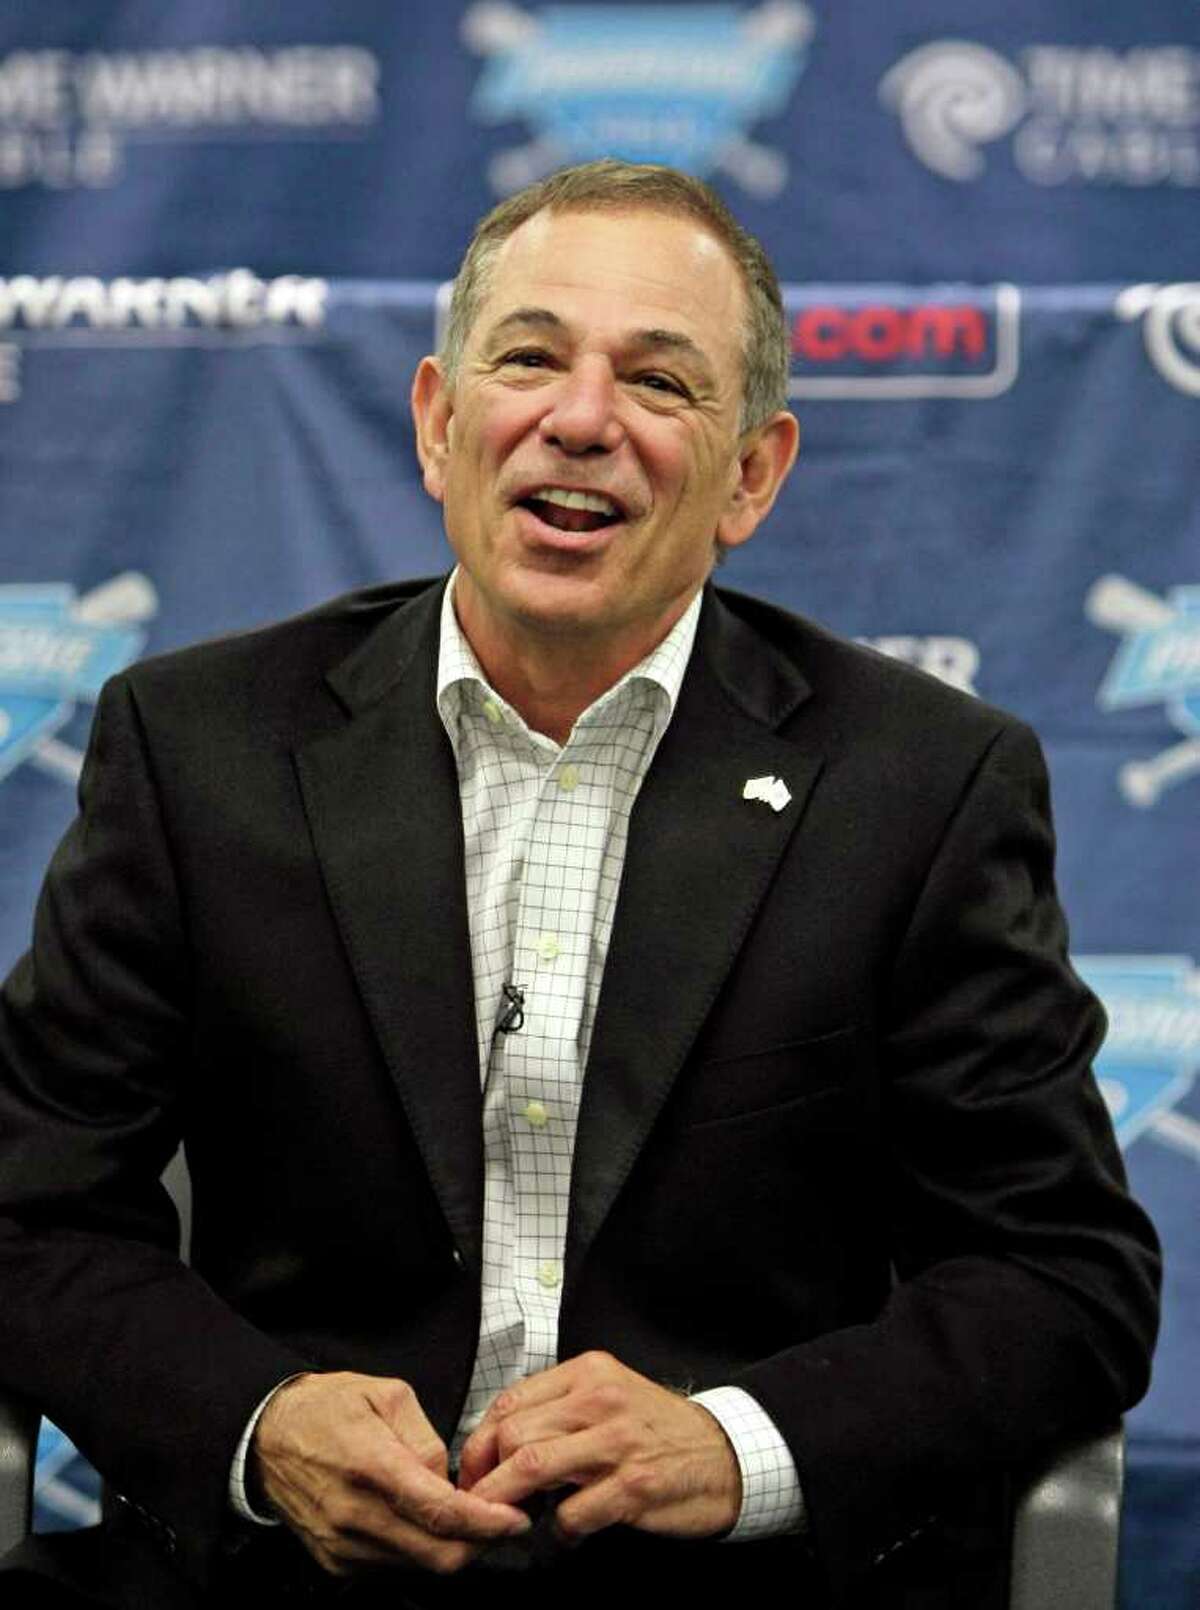 FILE - In this Oct. 22, 2009, file photo, former New York Mets manager Bobby Valentine talks with the media in Cleveland. A person familiar with the Florida Marlins' managerial search says the team was nearing a deal with Bobby Valentine and a meeting is scheduled for Friday, June 25, 2010. However, other interviews were still planned. Former Marlins' third-base coach Bo Porter also was speaking with the team about the job, getting a telephone interview Friday. (AP Photo/Tony Dejak)